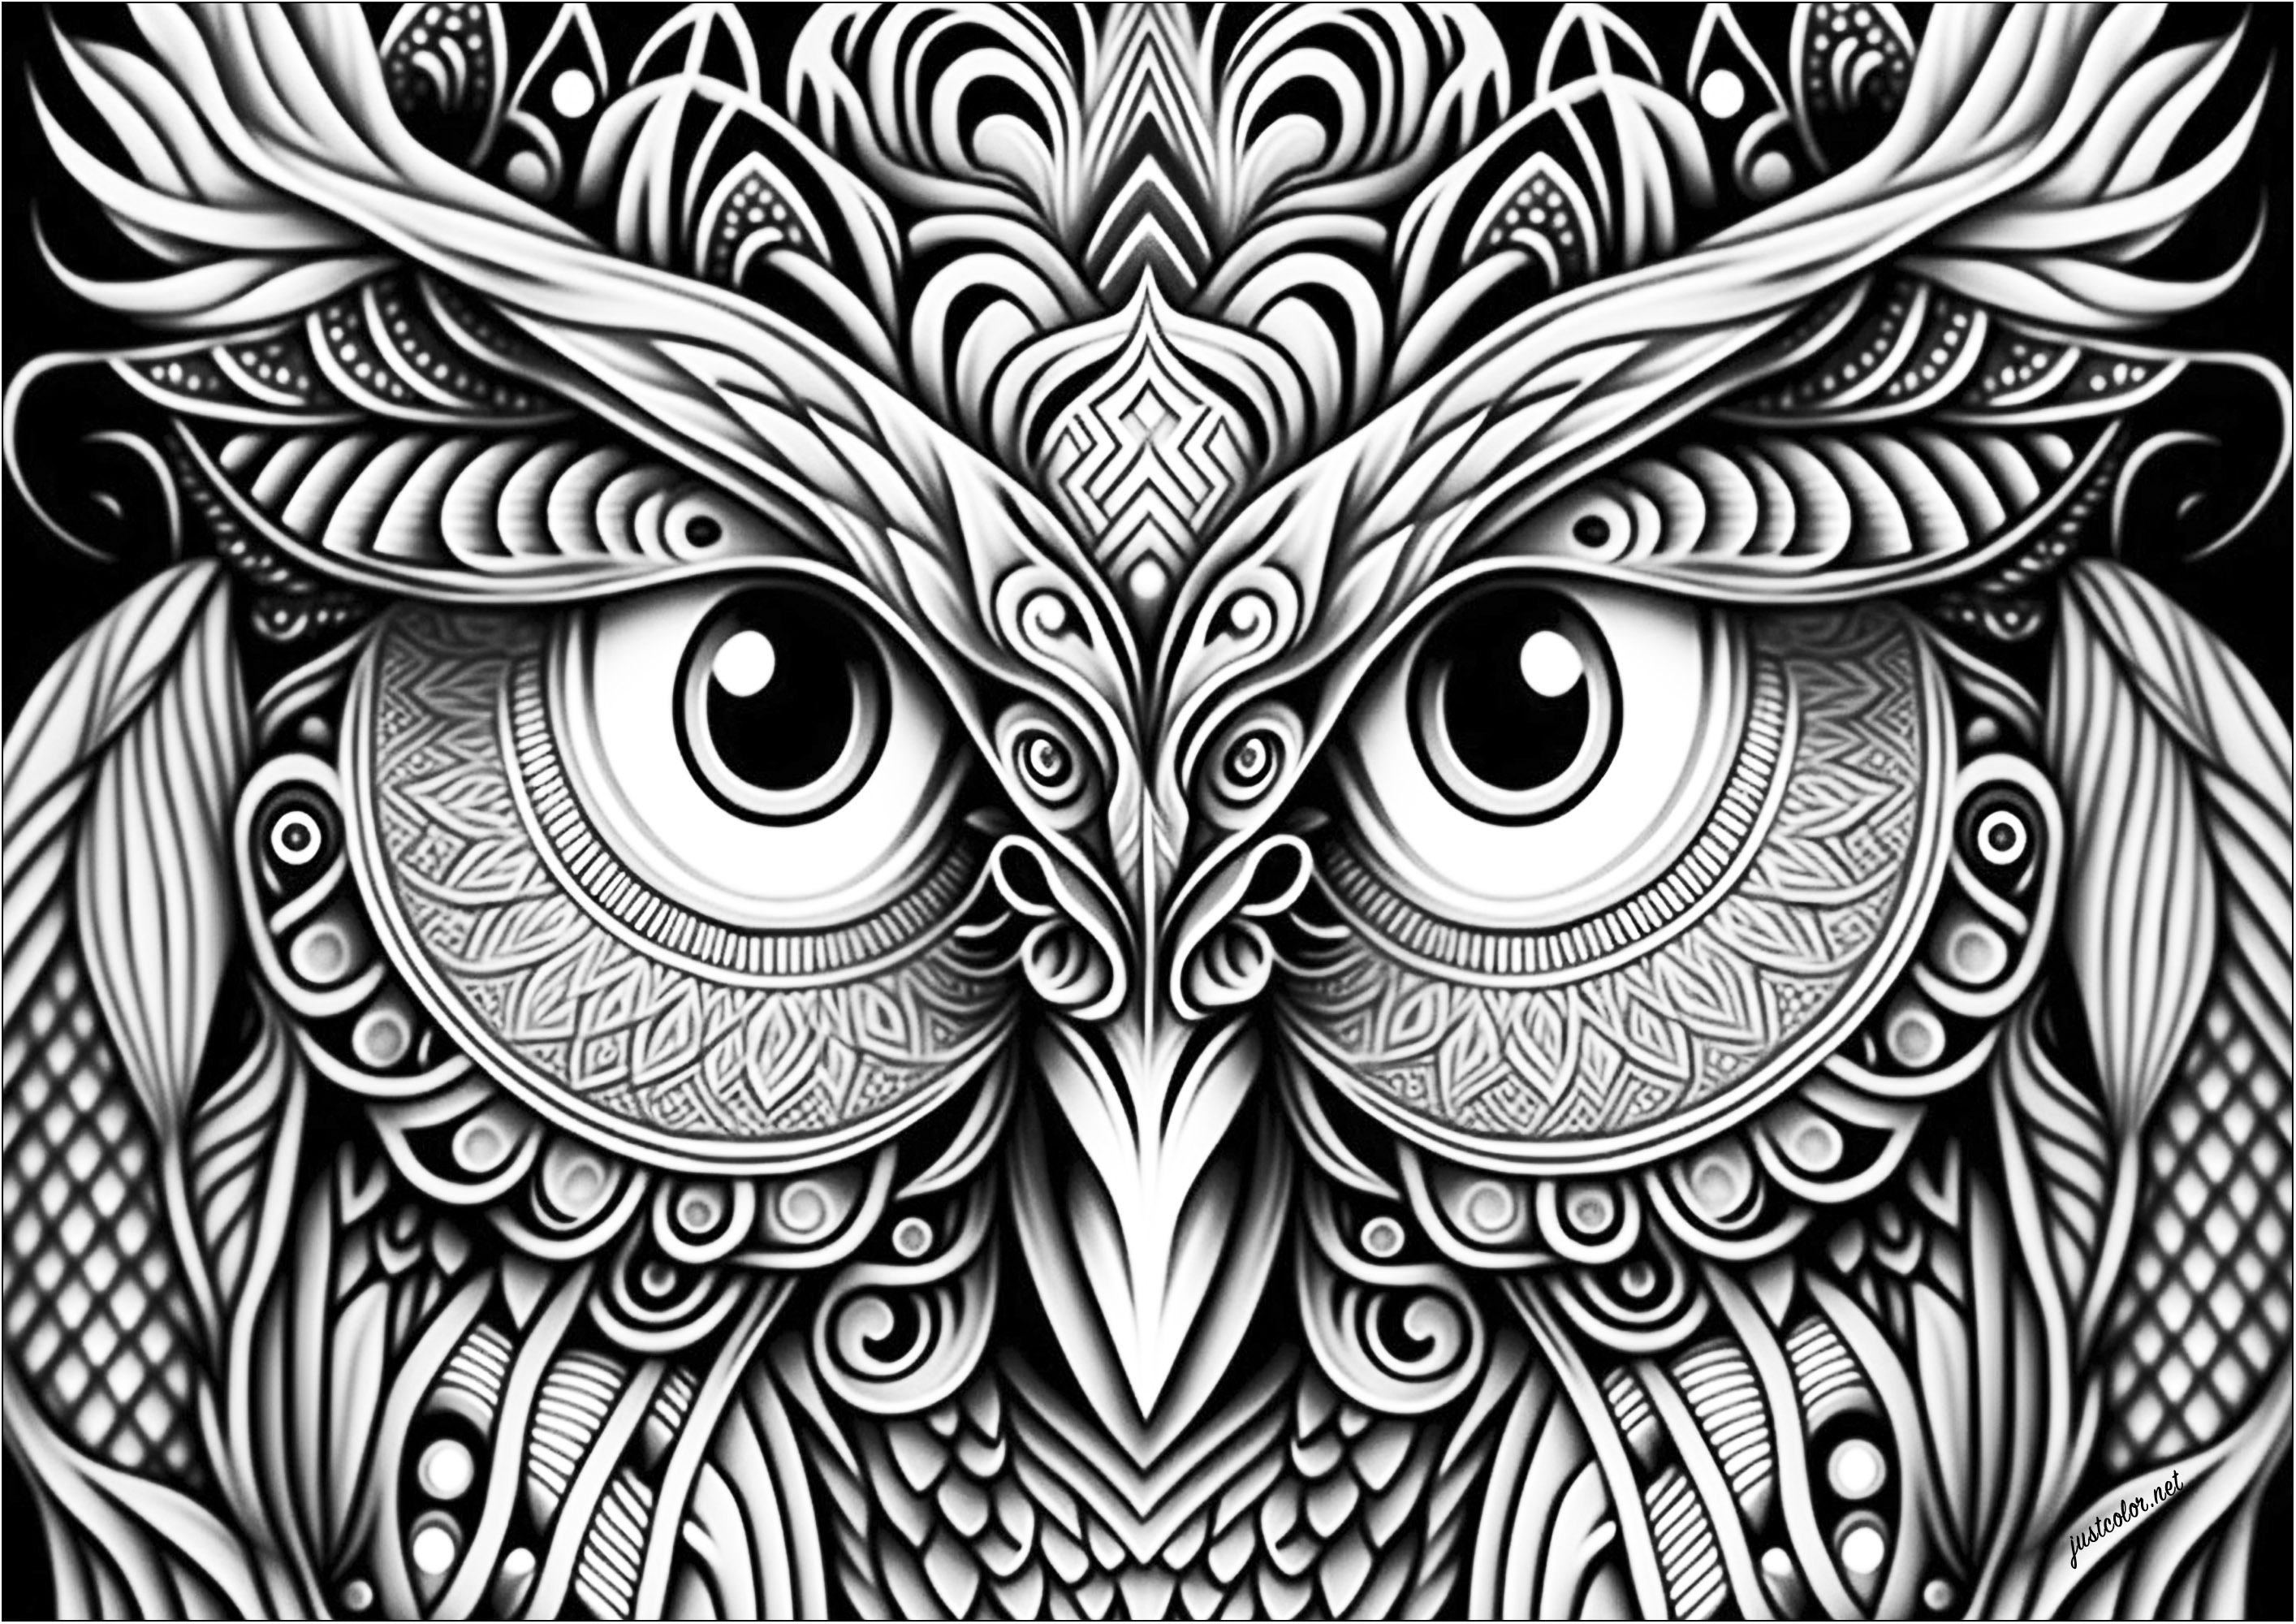 Owl head with many details to color. This coloring page is perfect for lovers of nocturnal animals! The owl head is very realistic and there are plenty of details to color.
